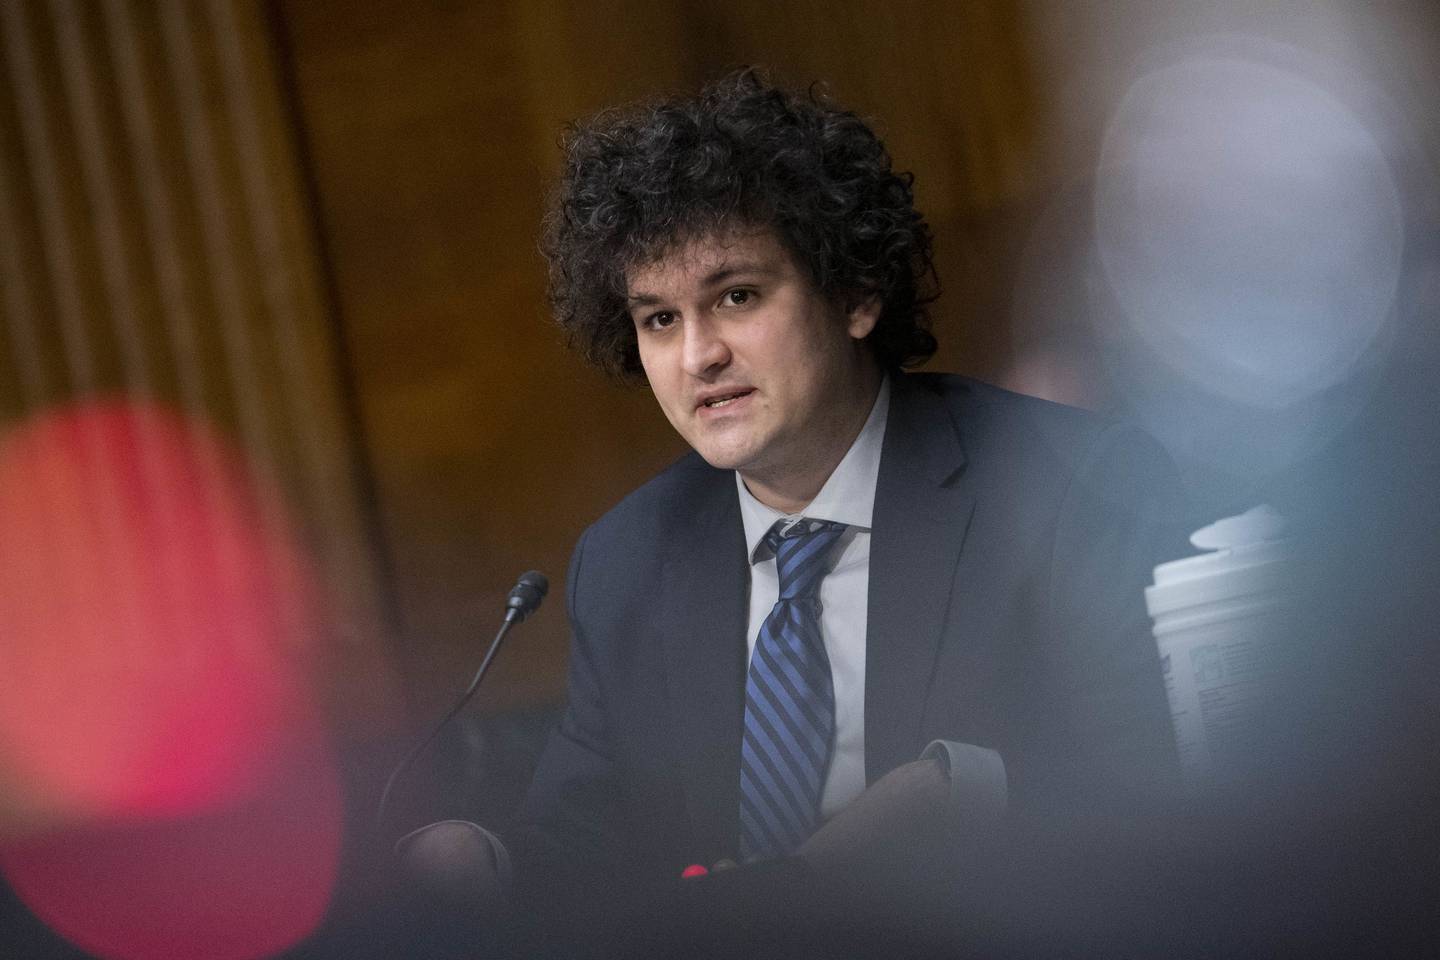 Sam Bankman-Fried, founder and chief executive officer of FTX Cryptocurrency Derivatives Exchange, speaks during a Senate Agriculture, Nutrition and Forestry Committee hearing in Washington, D.C., U.S., on Wednesday, Feb. 9, 2022.